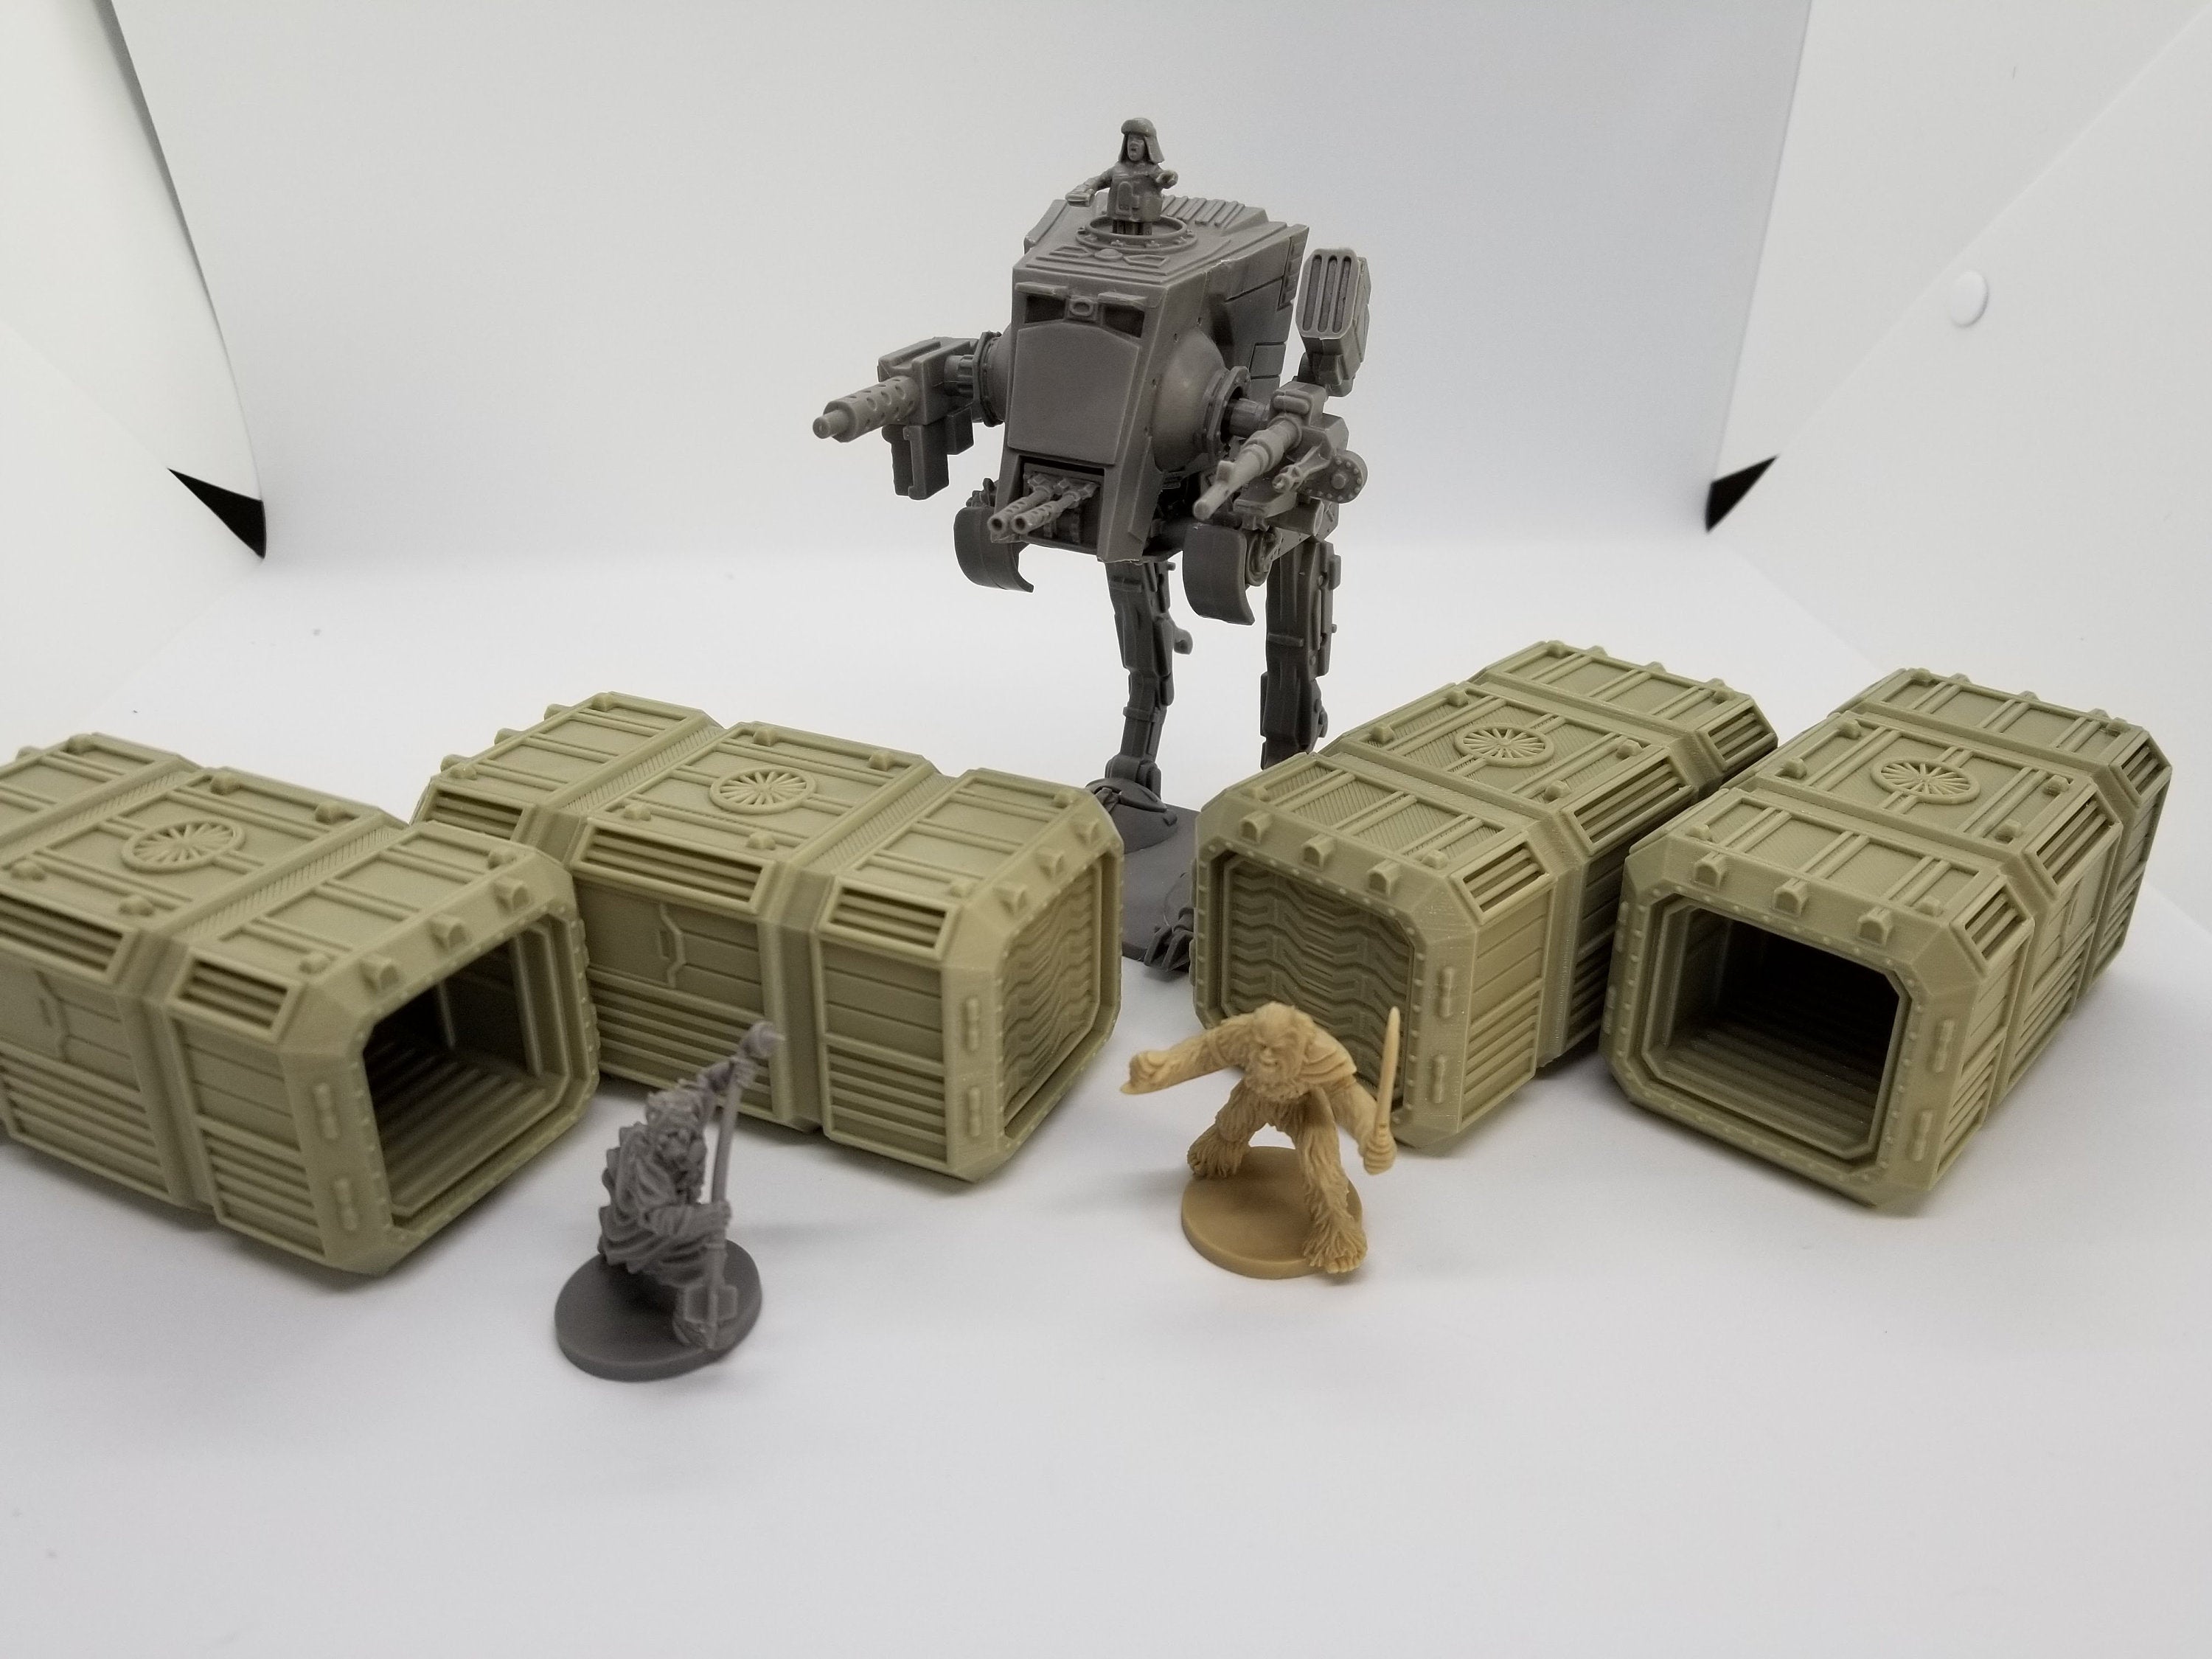 Sci-Fi Smaller Scale Container Pack #1 / 28mm Wargaming Terrain / Warlayer /Print to Order / 3d Printed/Licensed Printer